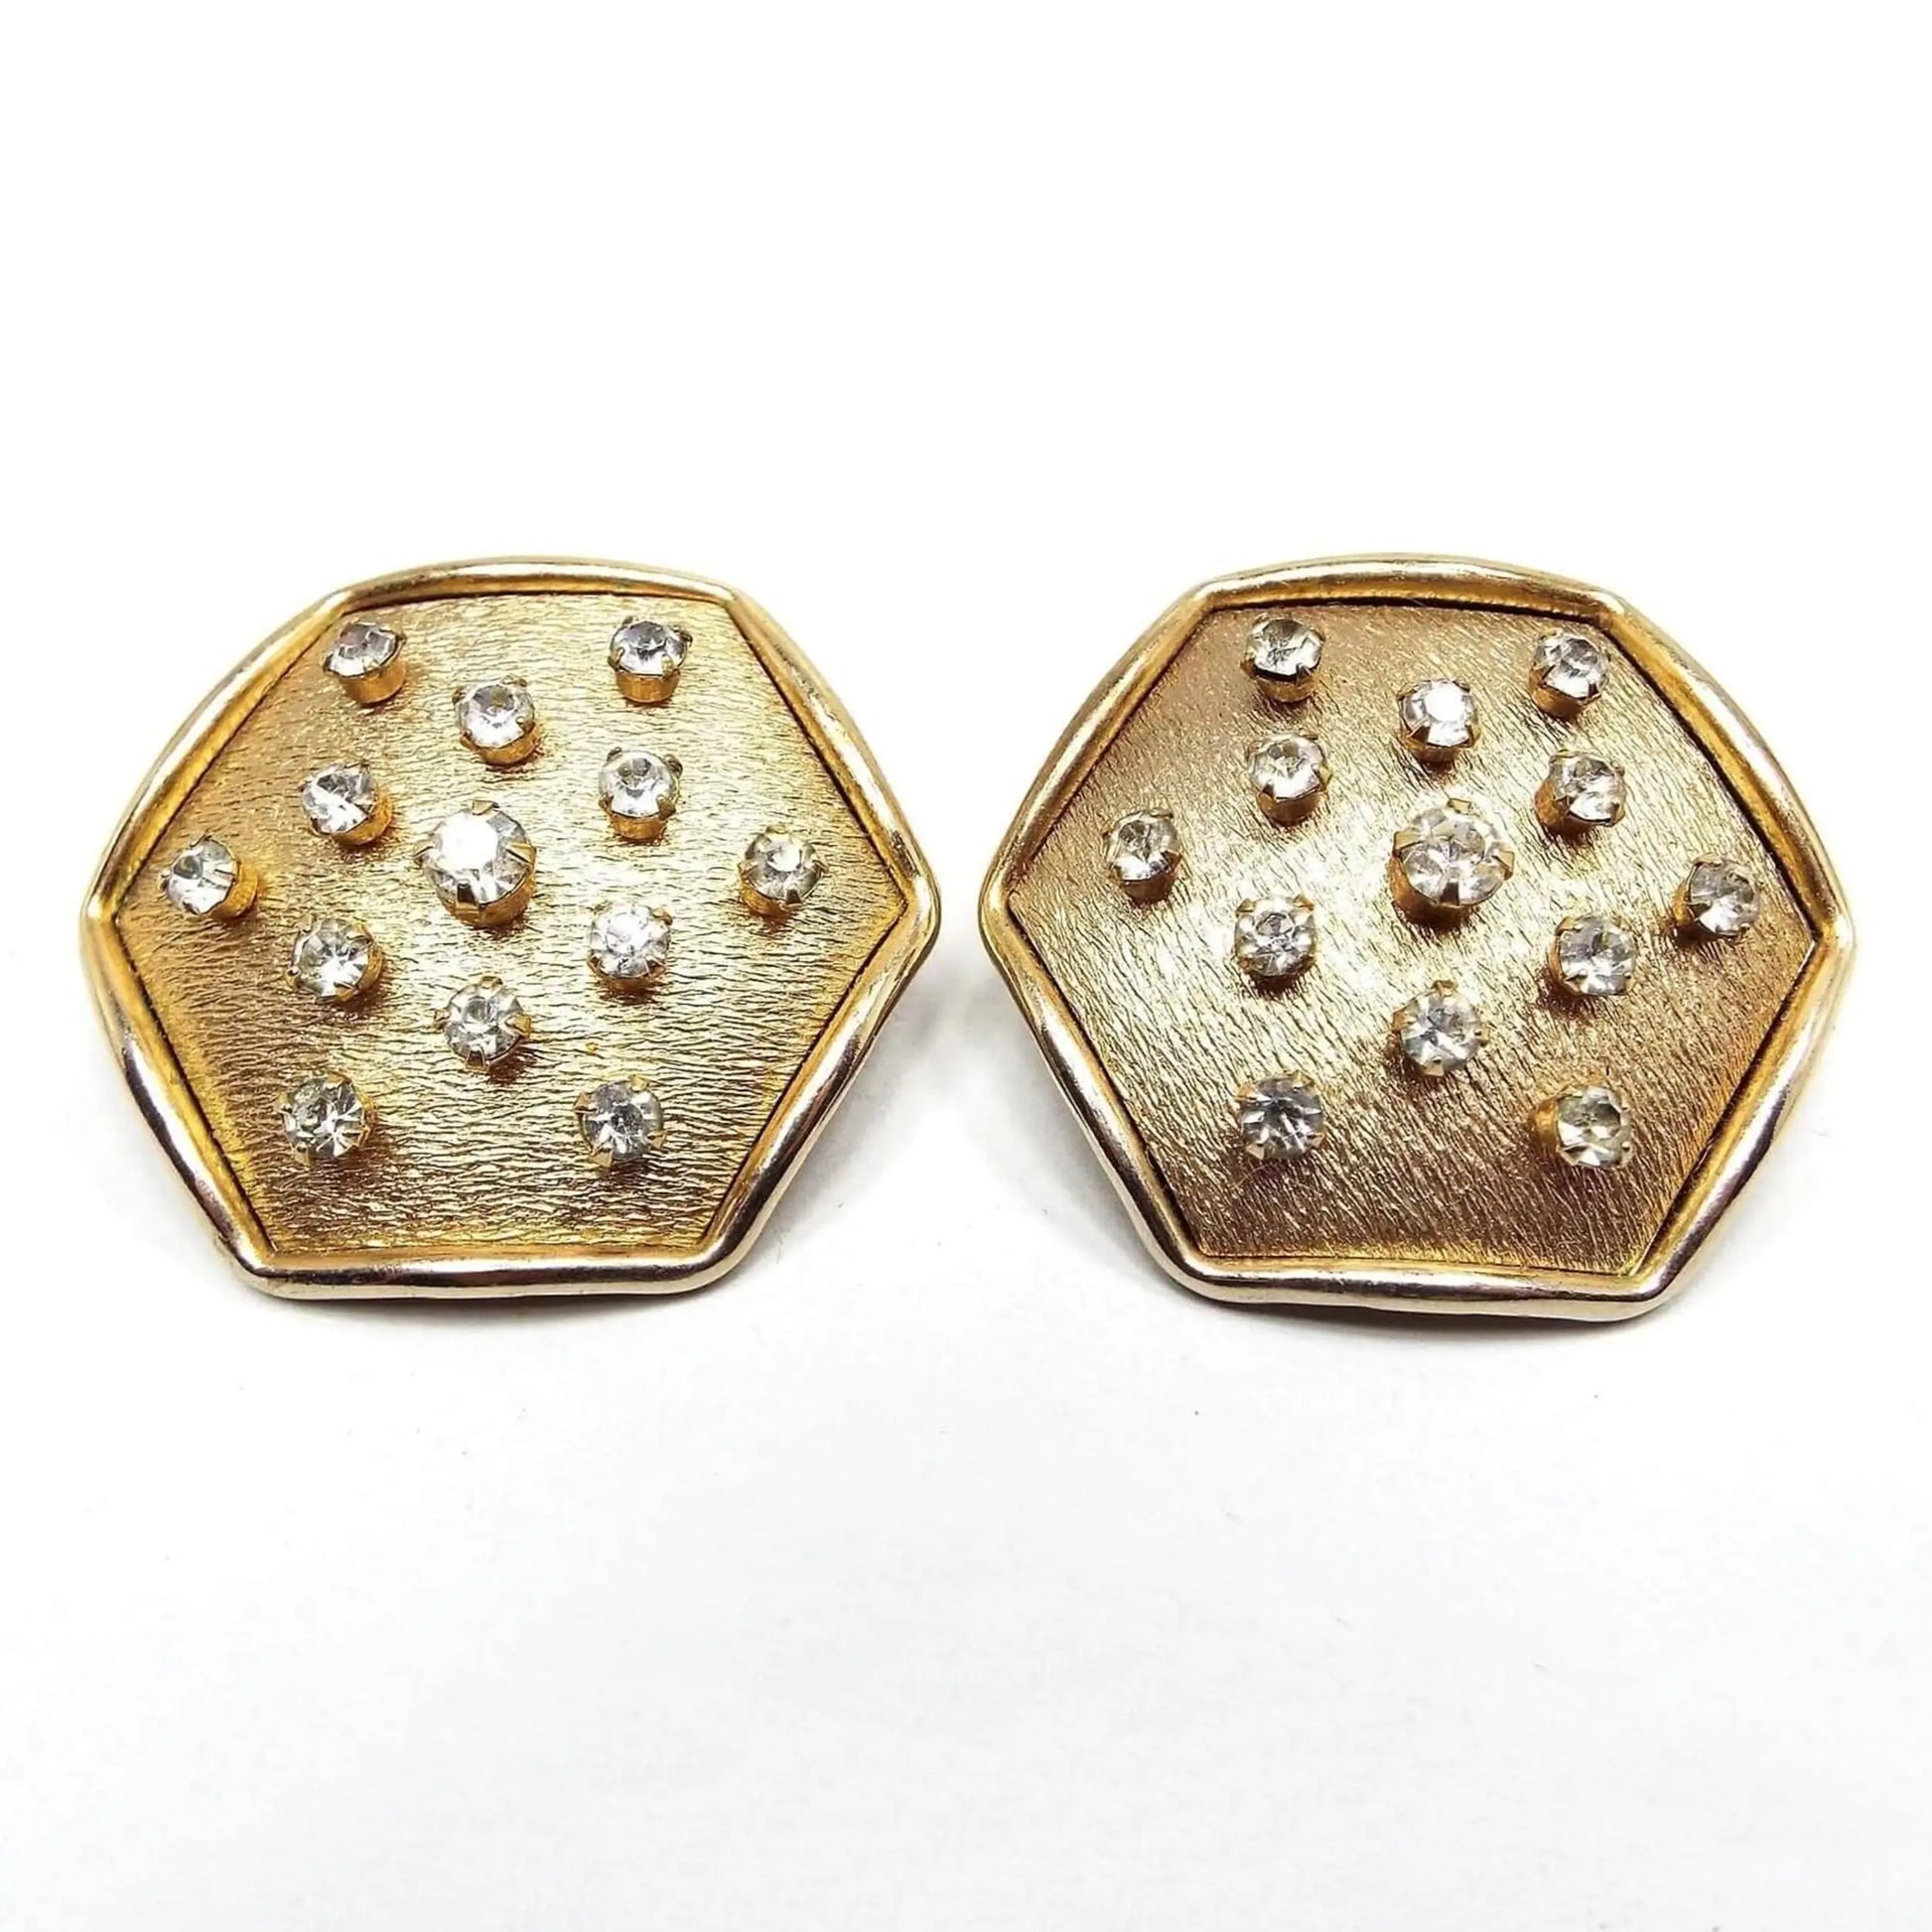 Front view of the retro vintage geometric clip on earrings. The metal is brushed matte gold tone in color with a shiny edge. They are large hexagon in shape with small round prong set rhinestones throughout the hexagon.